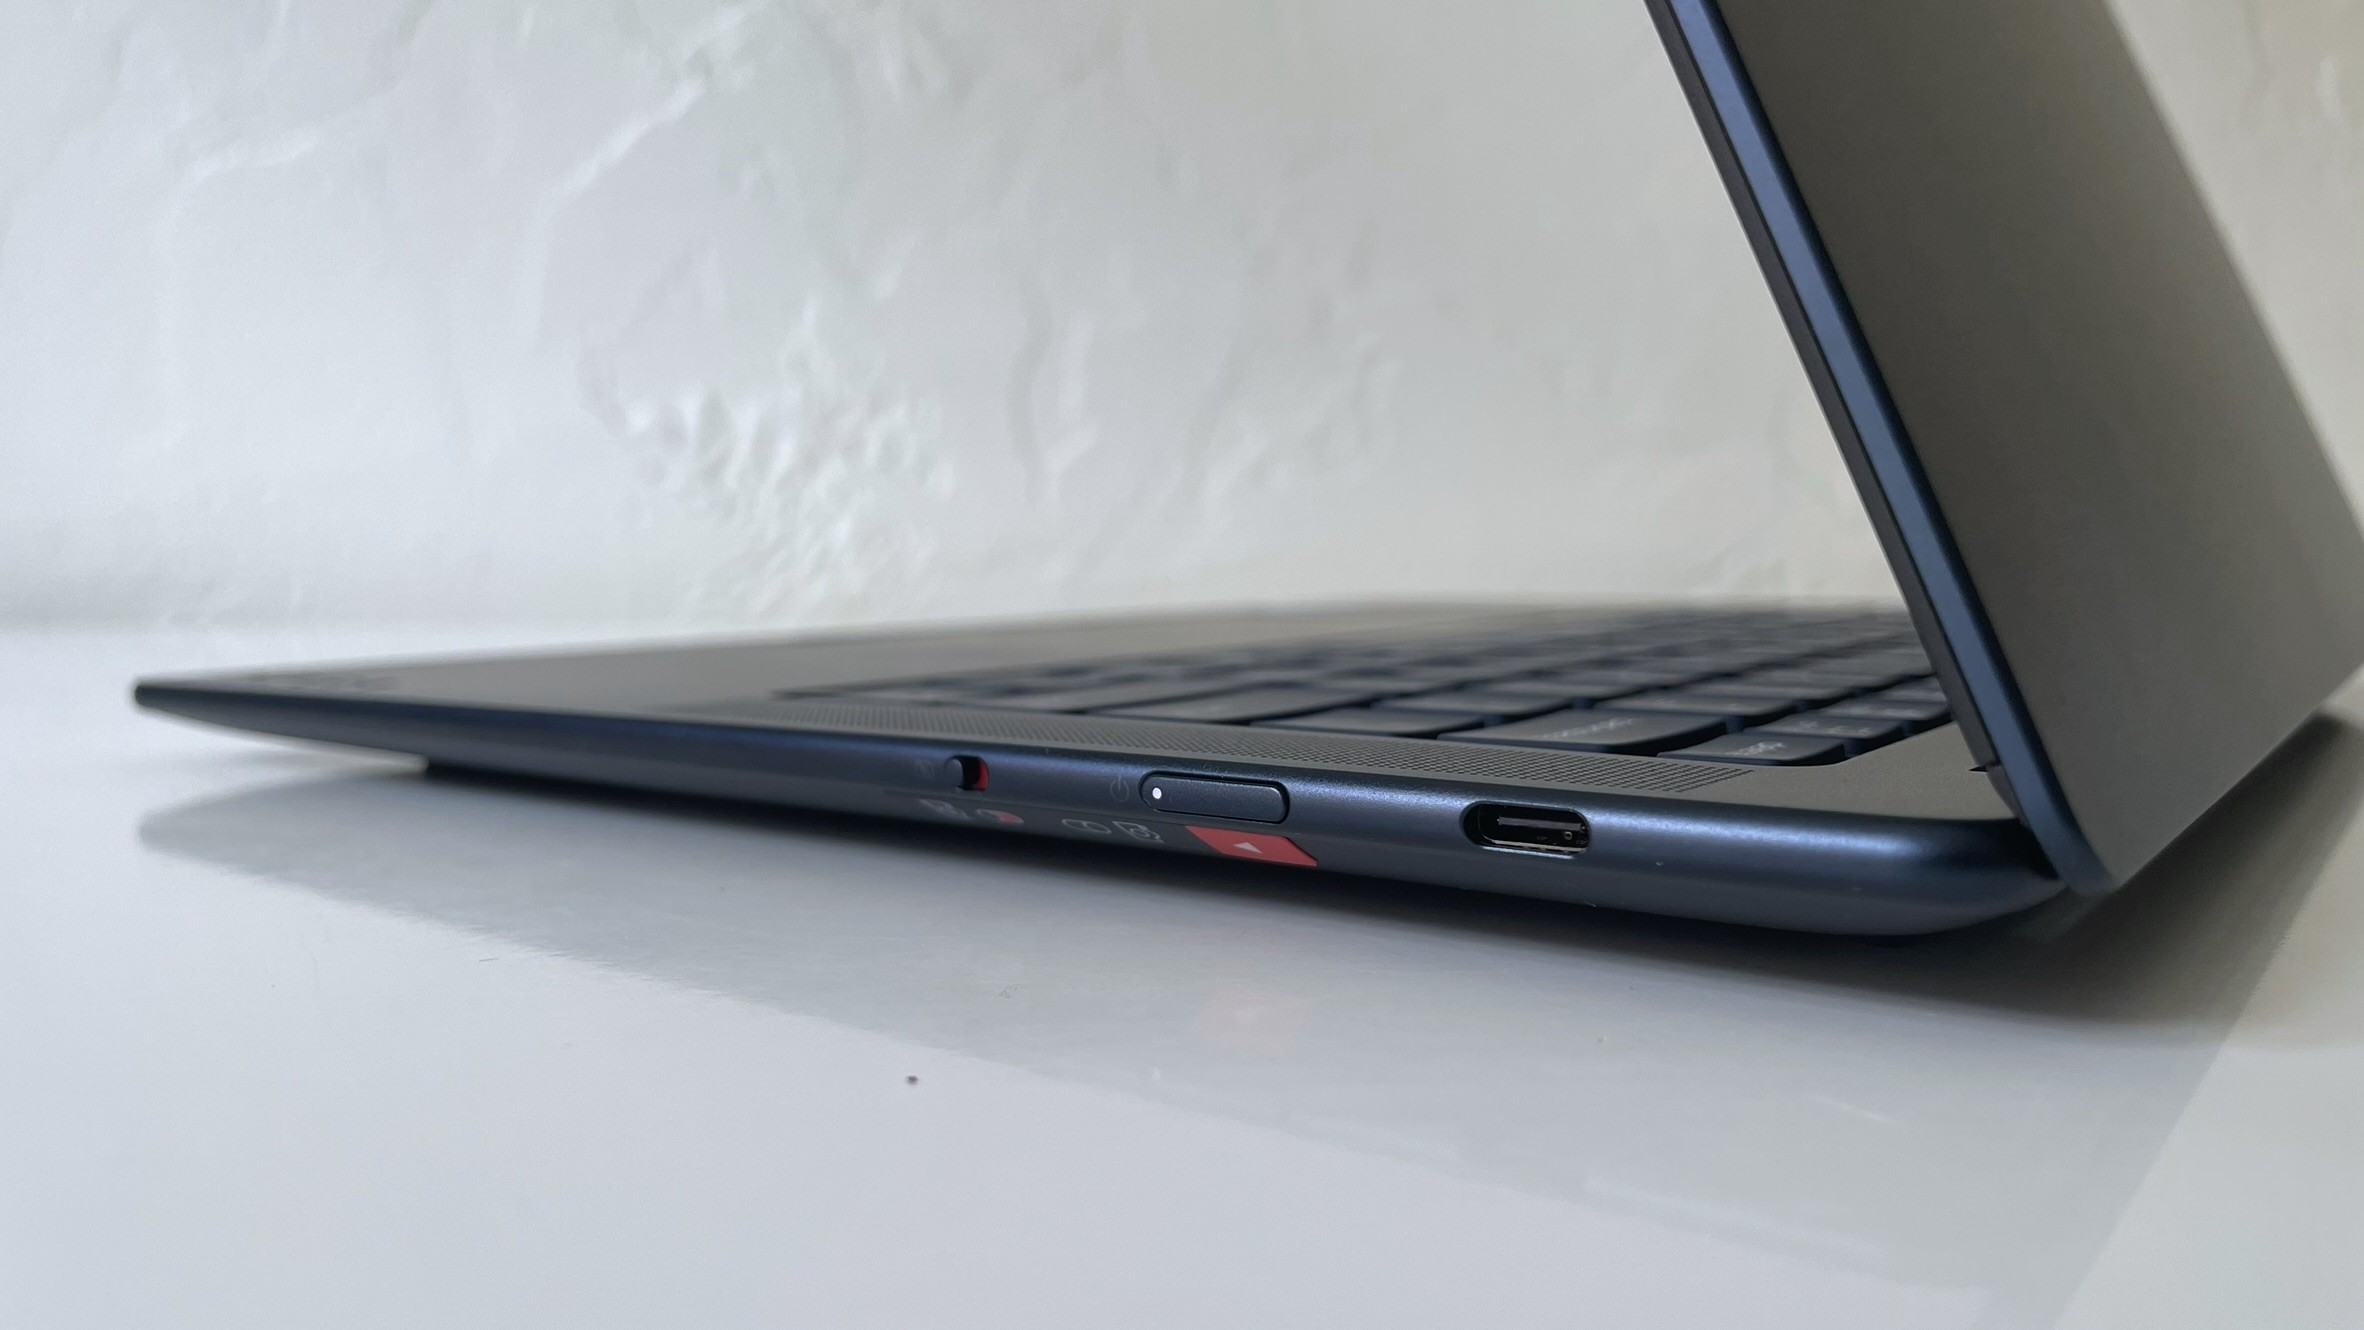 Close up of the ports on the right side of the Lenovo Yoga Slim 7x seen on a white desk